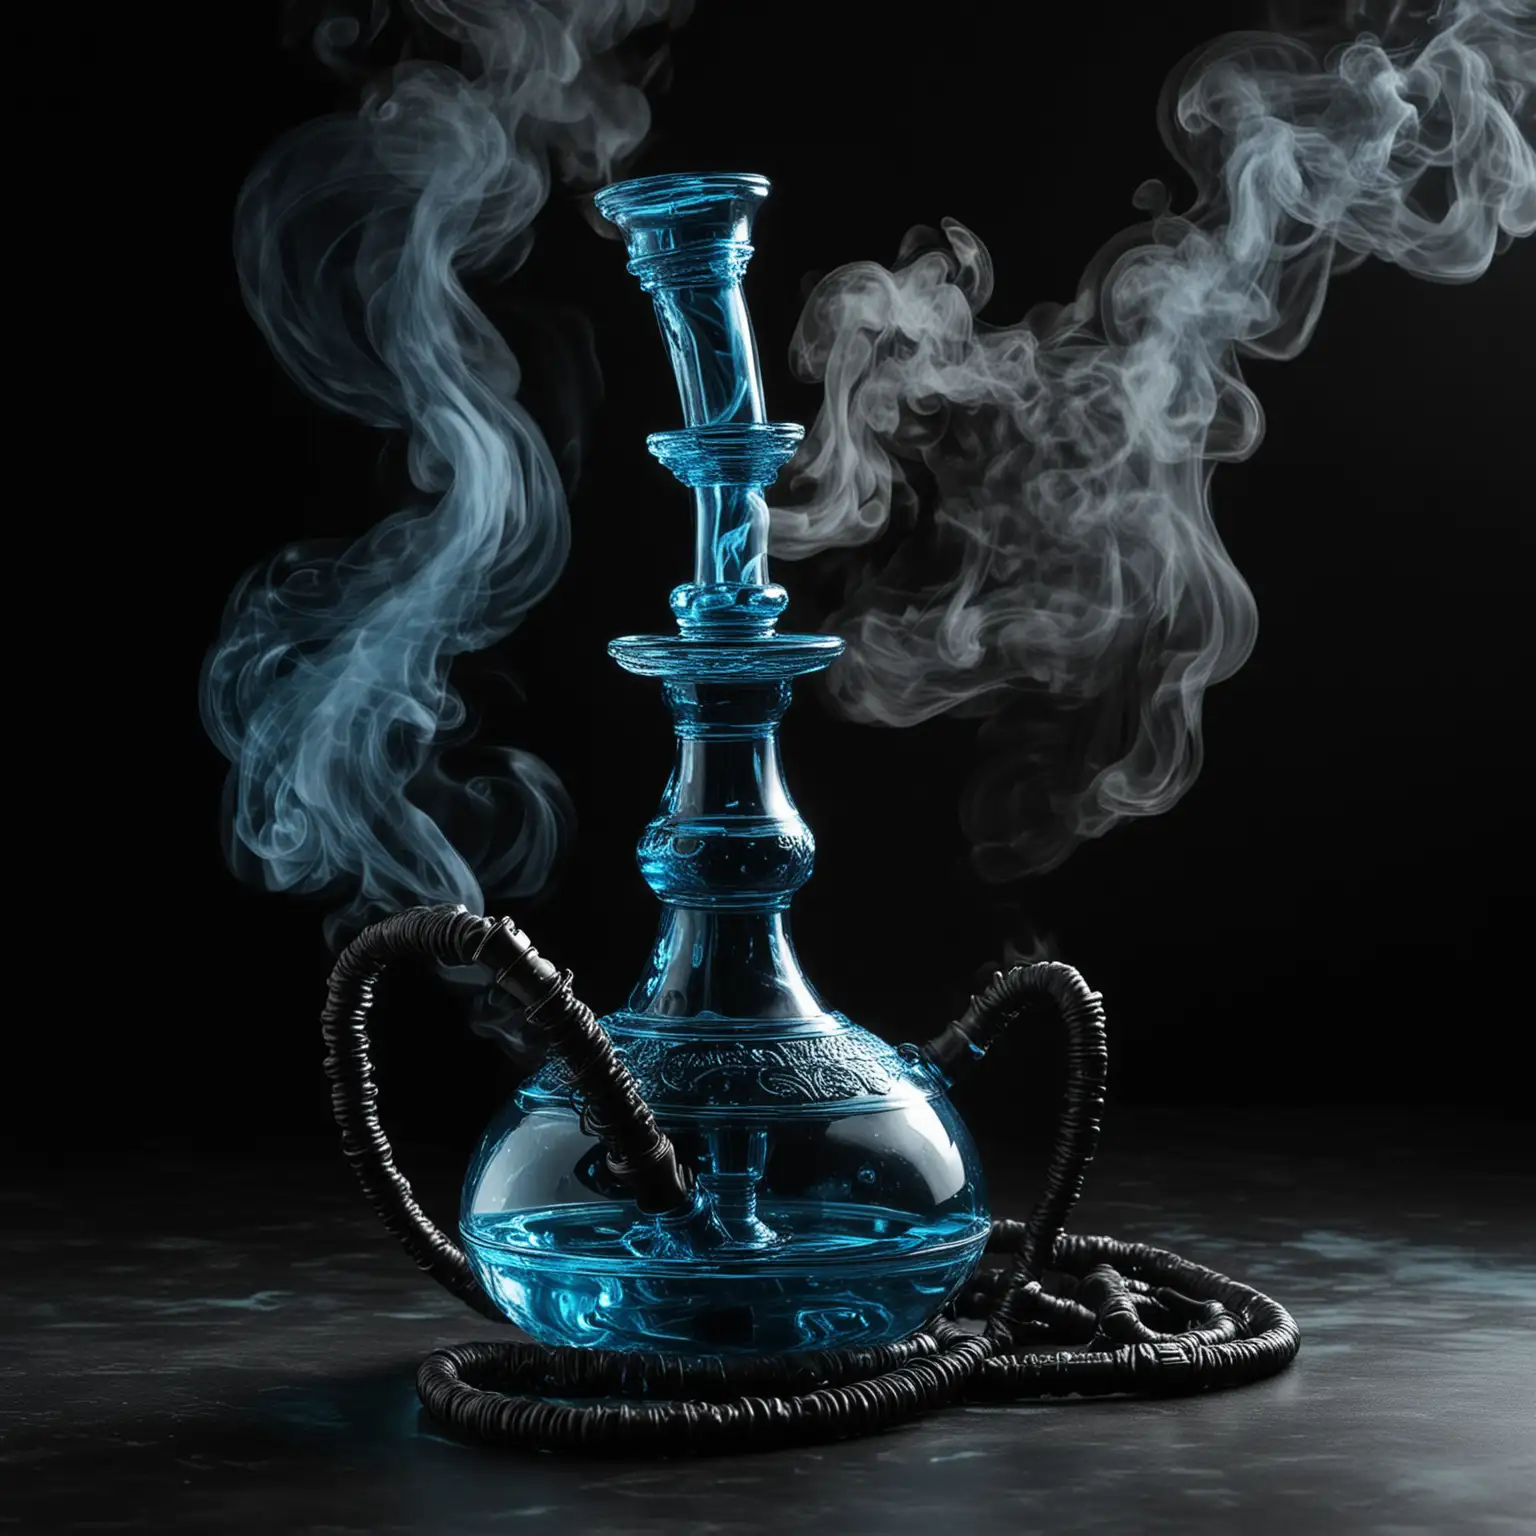 Transparent Blue Water Hookah with Smoke on Black Background